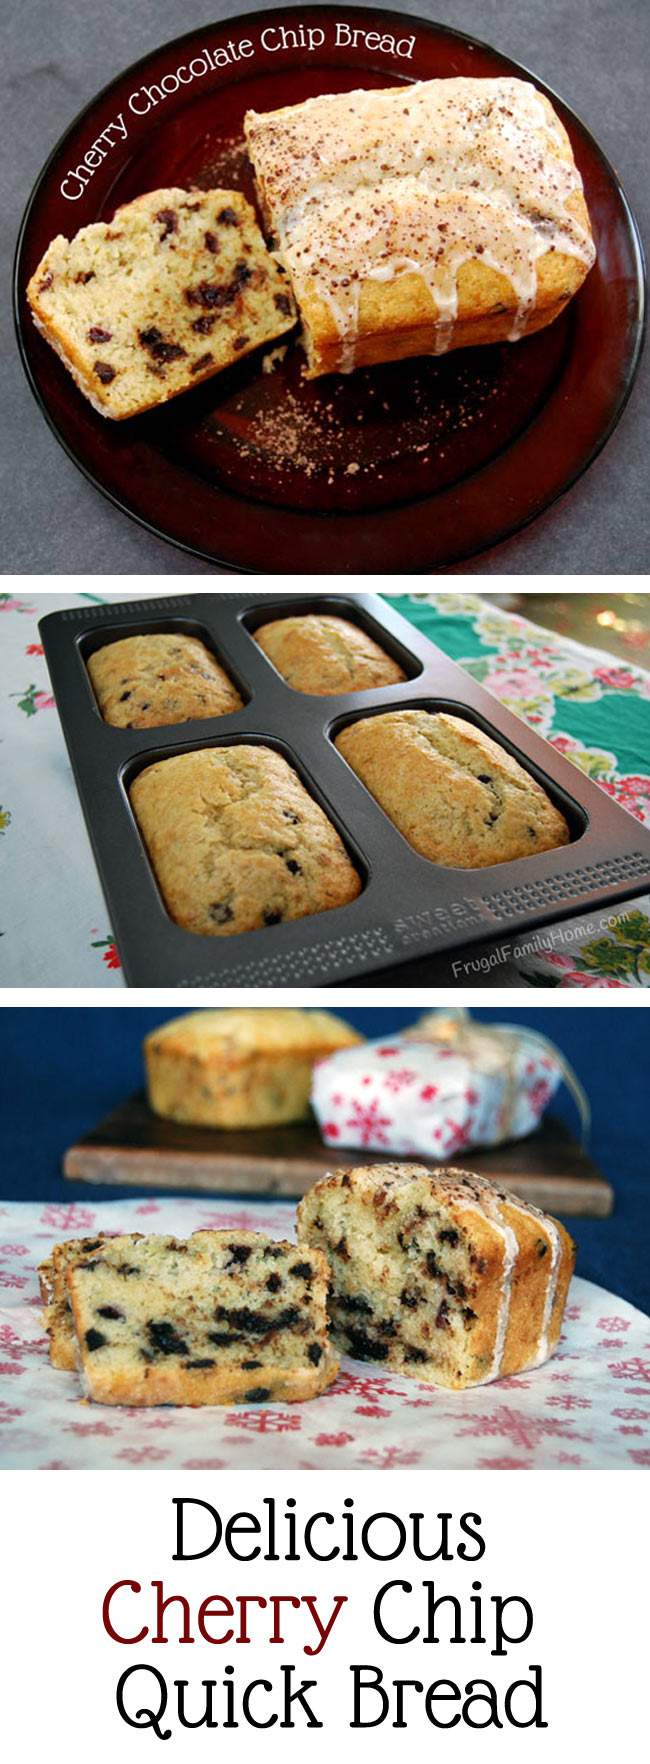 This quick bread recipe is so delicious! It has just the right balance of vanilla, cherry and chocolate flavors plus it's easy to make because it's a quick bread recipe.